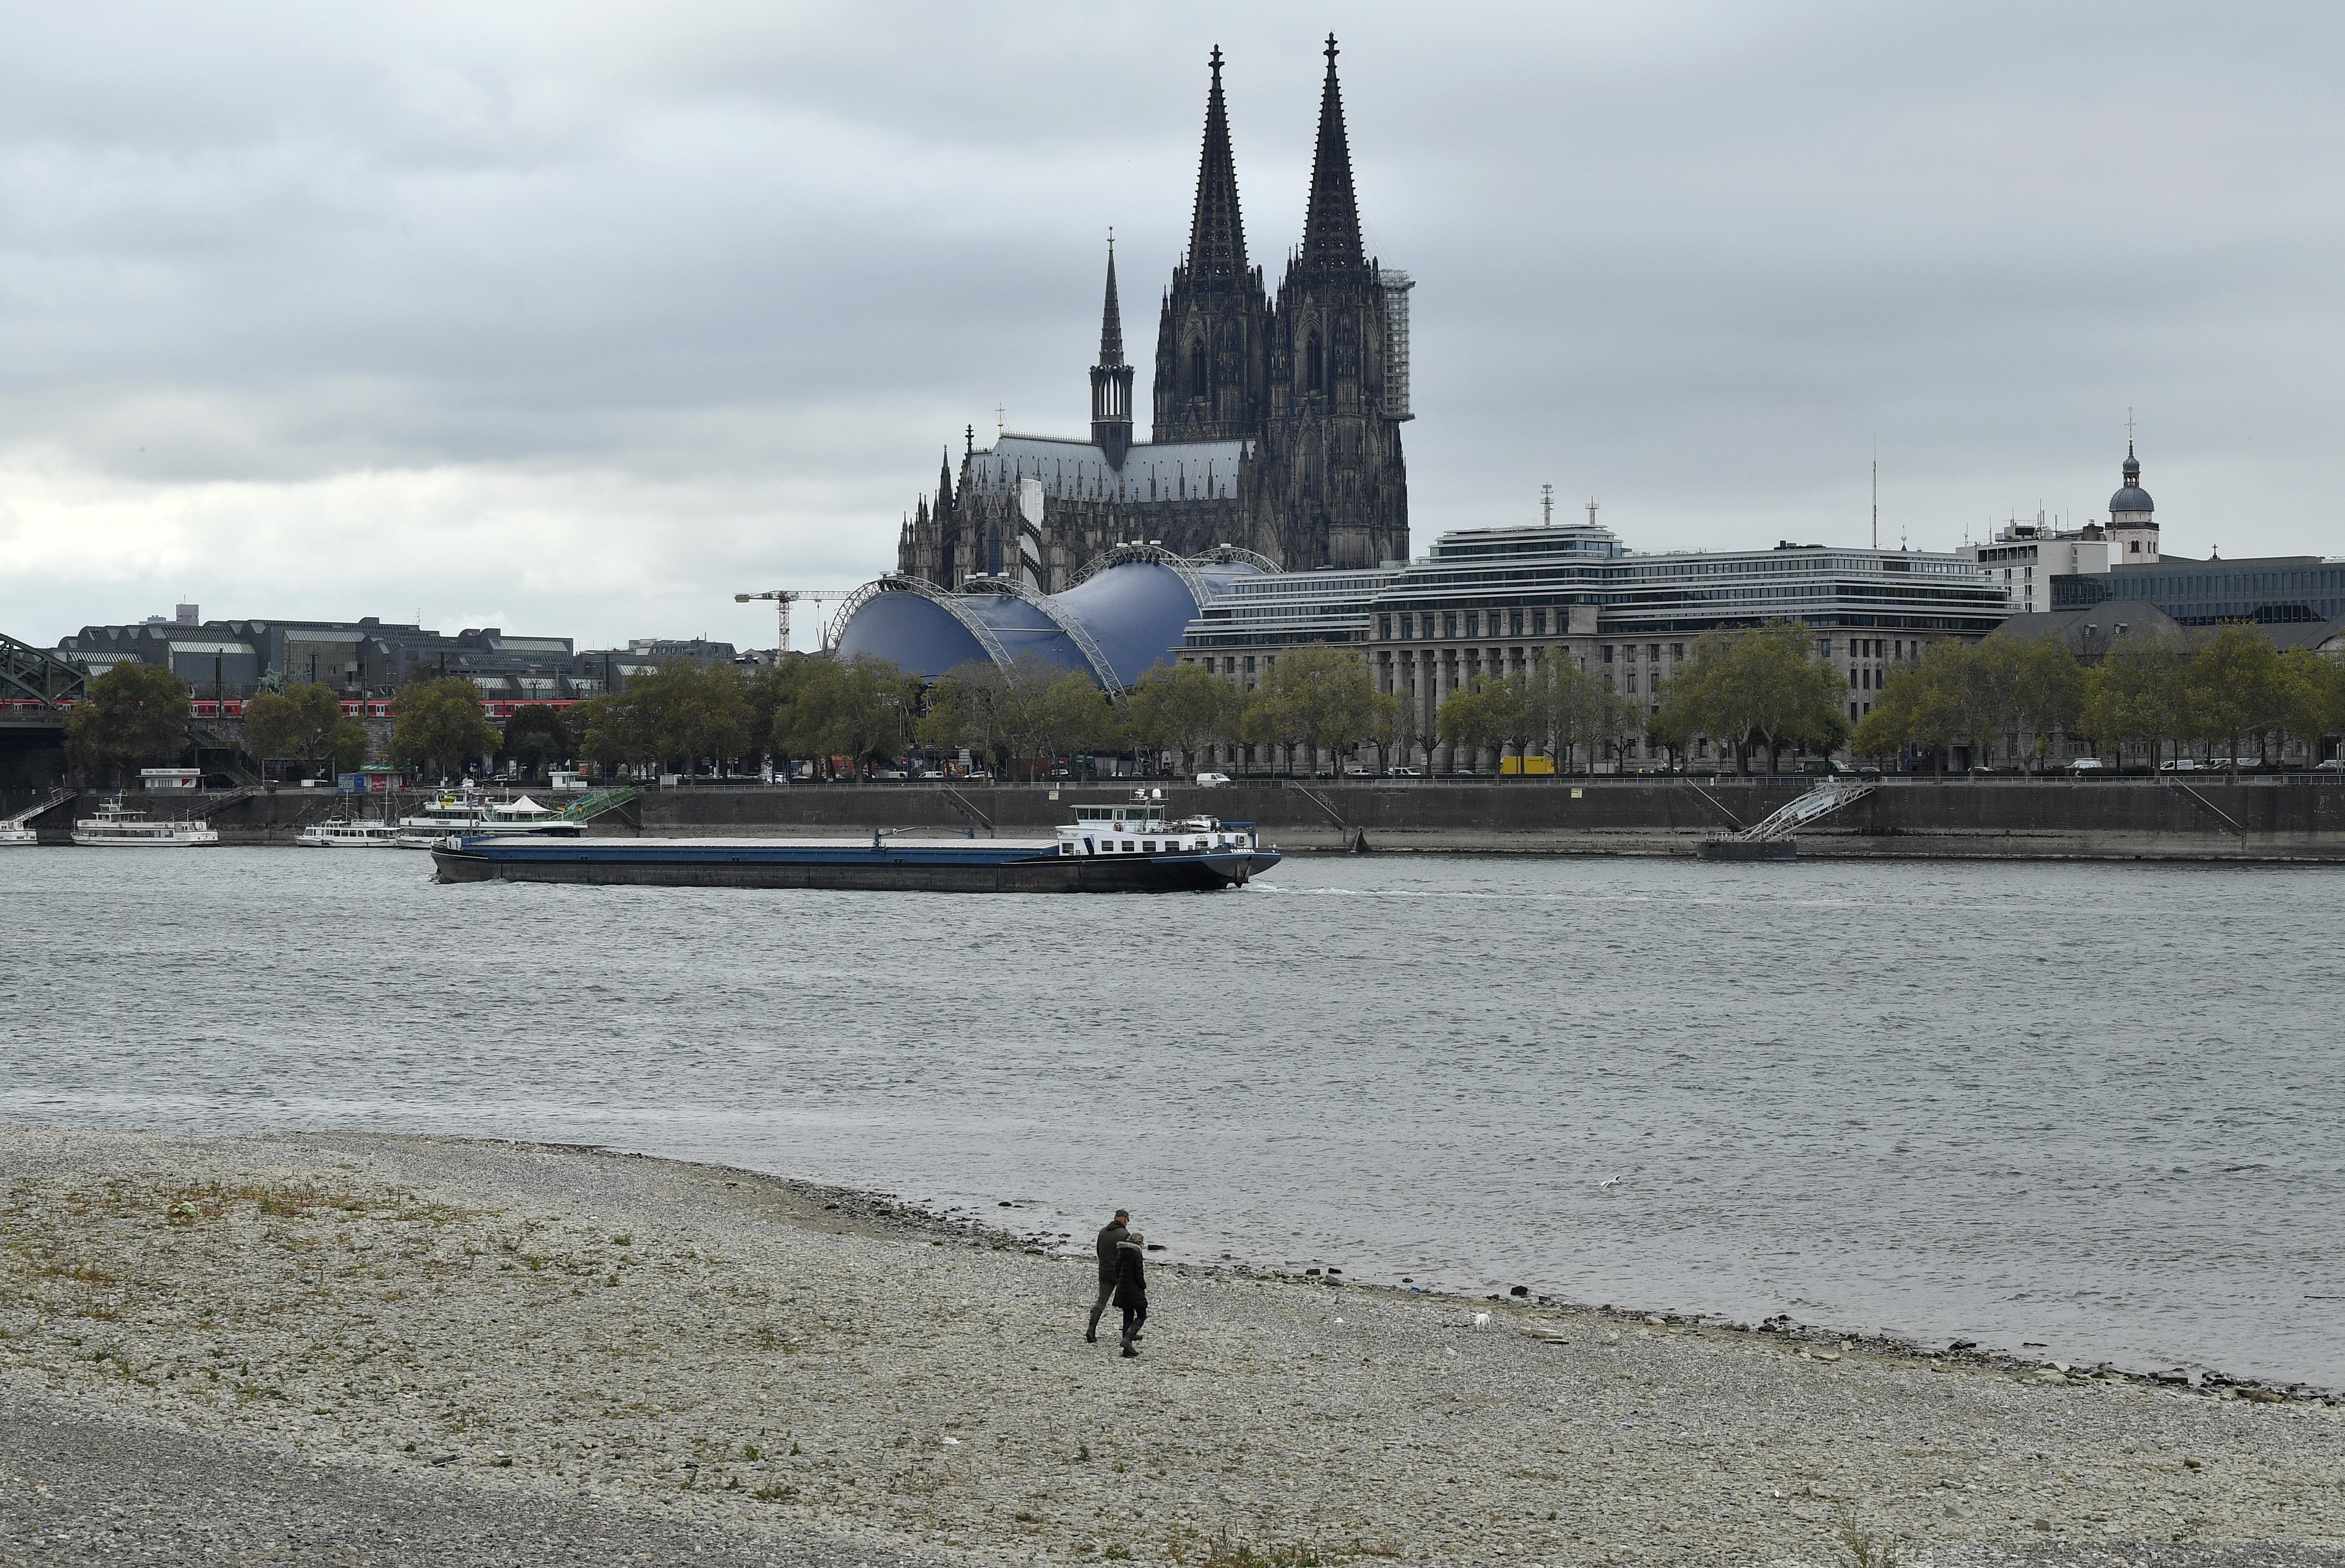 A ship on the Rhine River passes the cathedral in Cologne